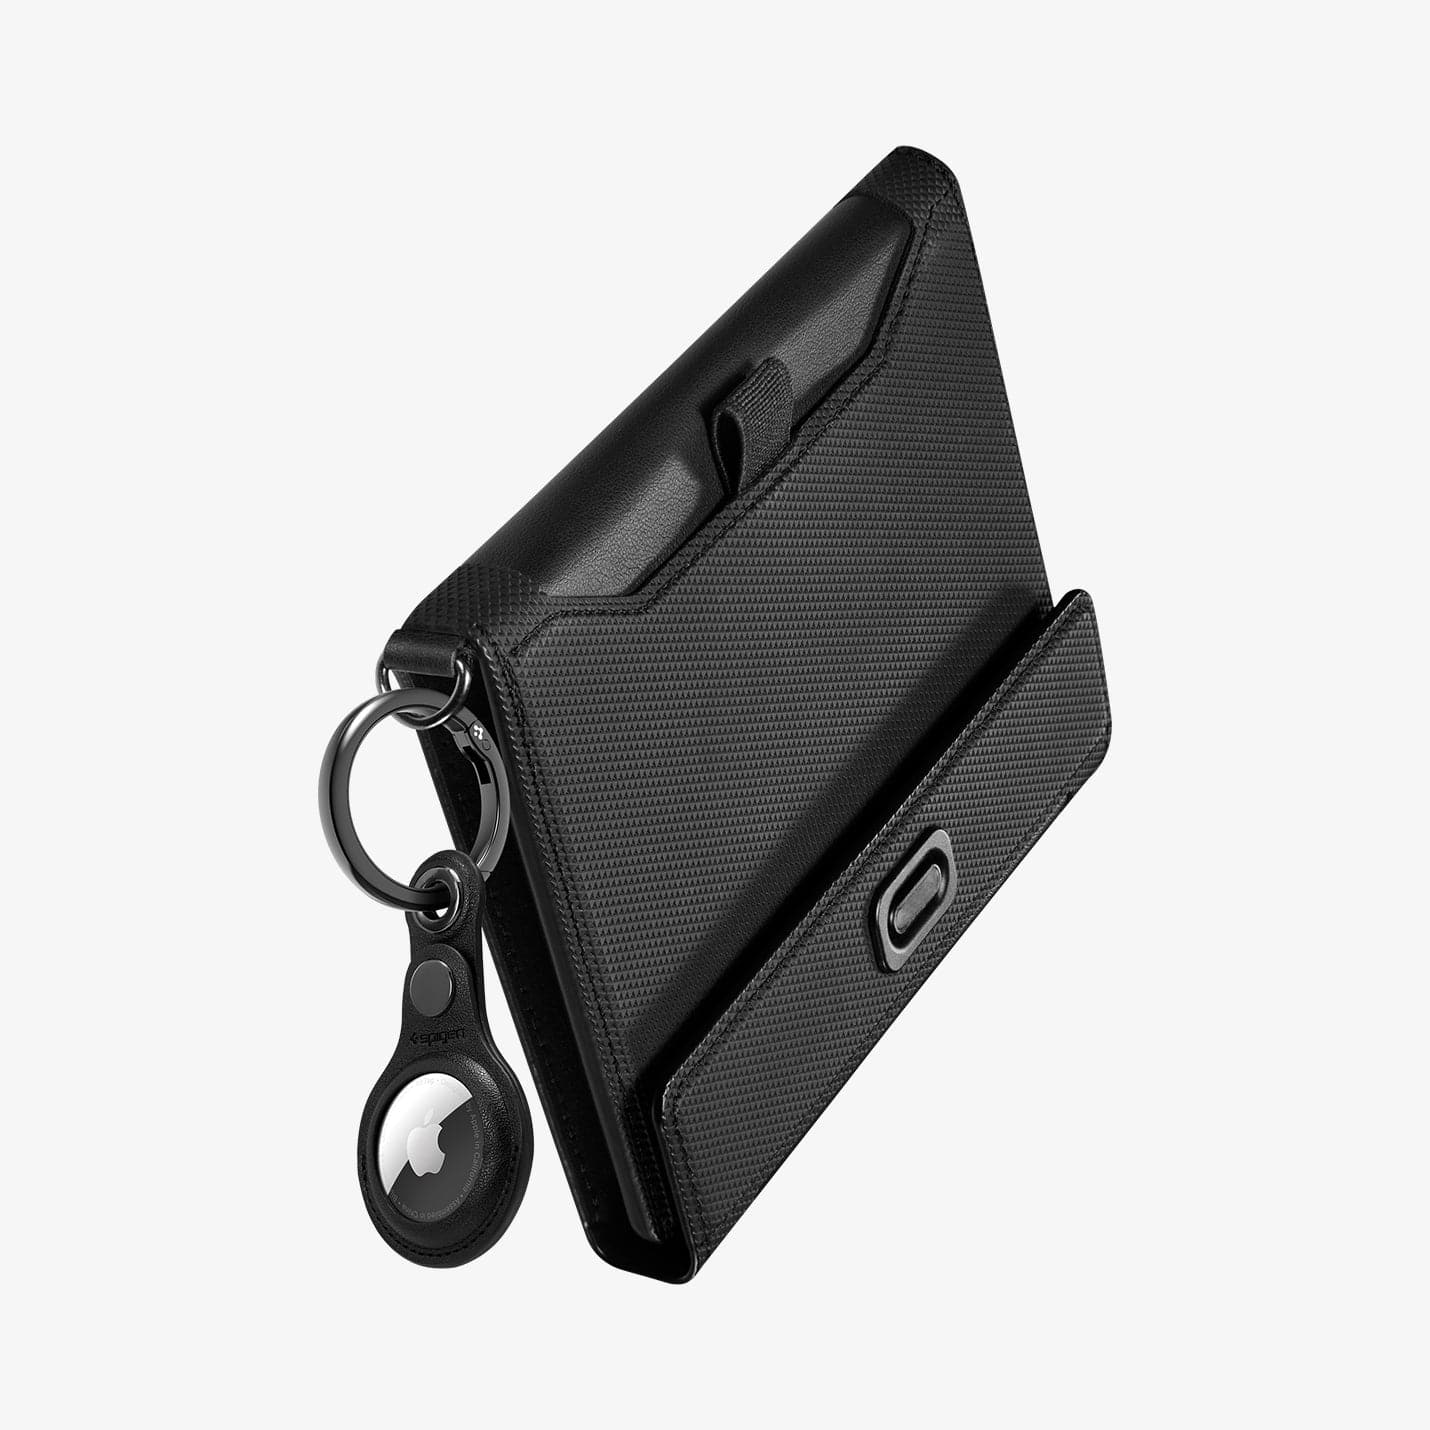 AFA05538 - Passport Holder in black showing the back, side and airtag on attached keychain